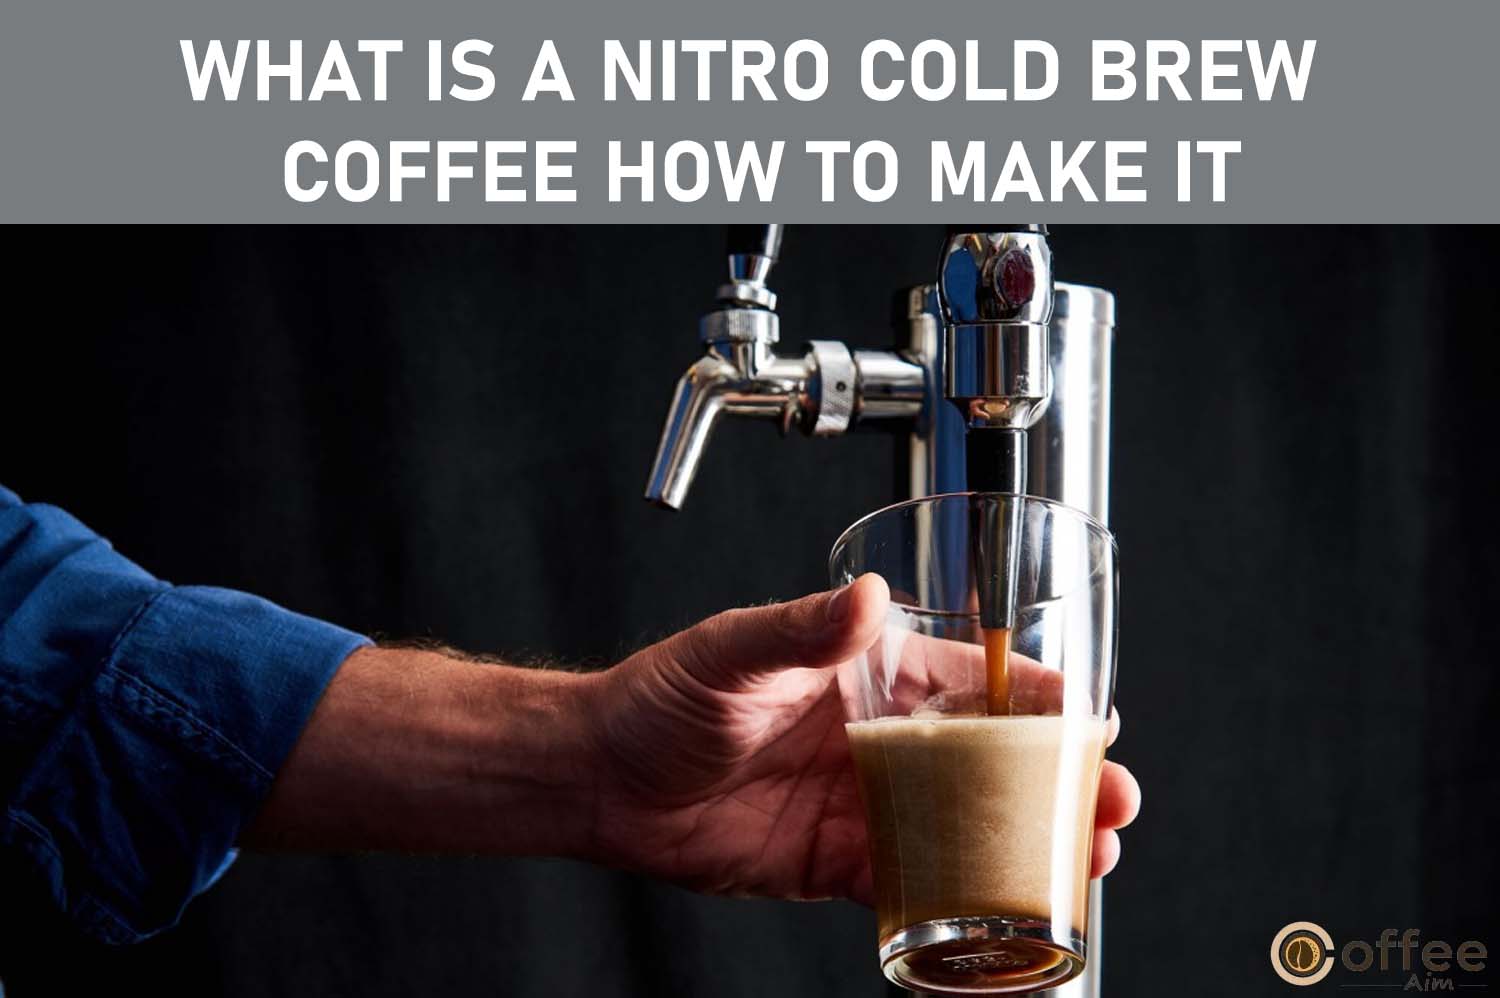 Featured image for the artilce "What Is A Nitro Cold Brew Coffee? How to Make It"